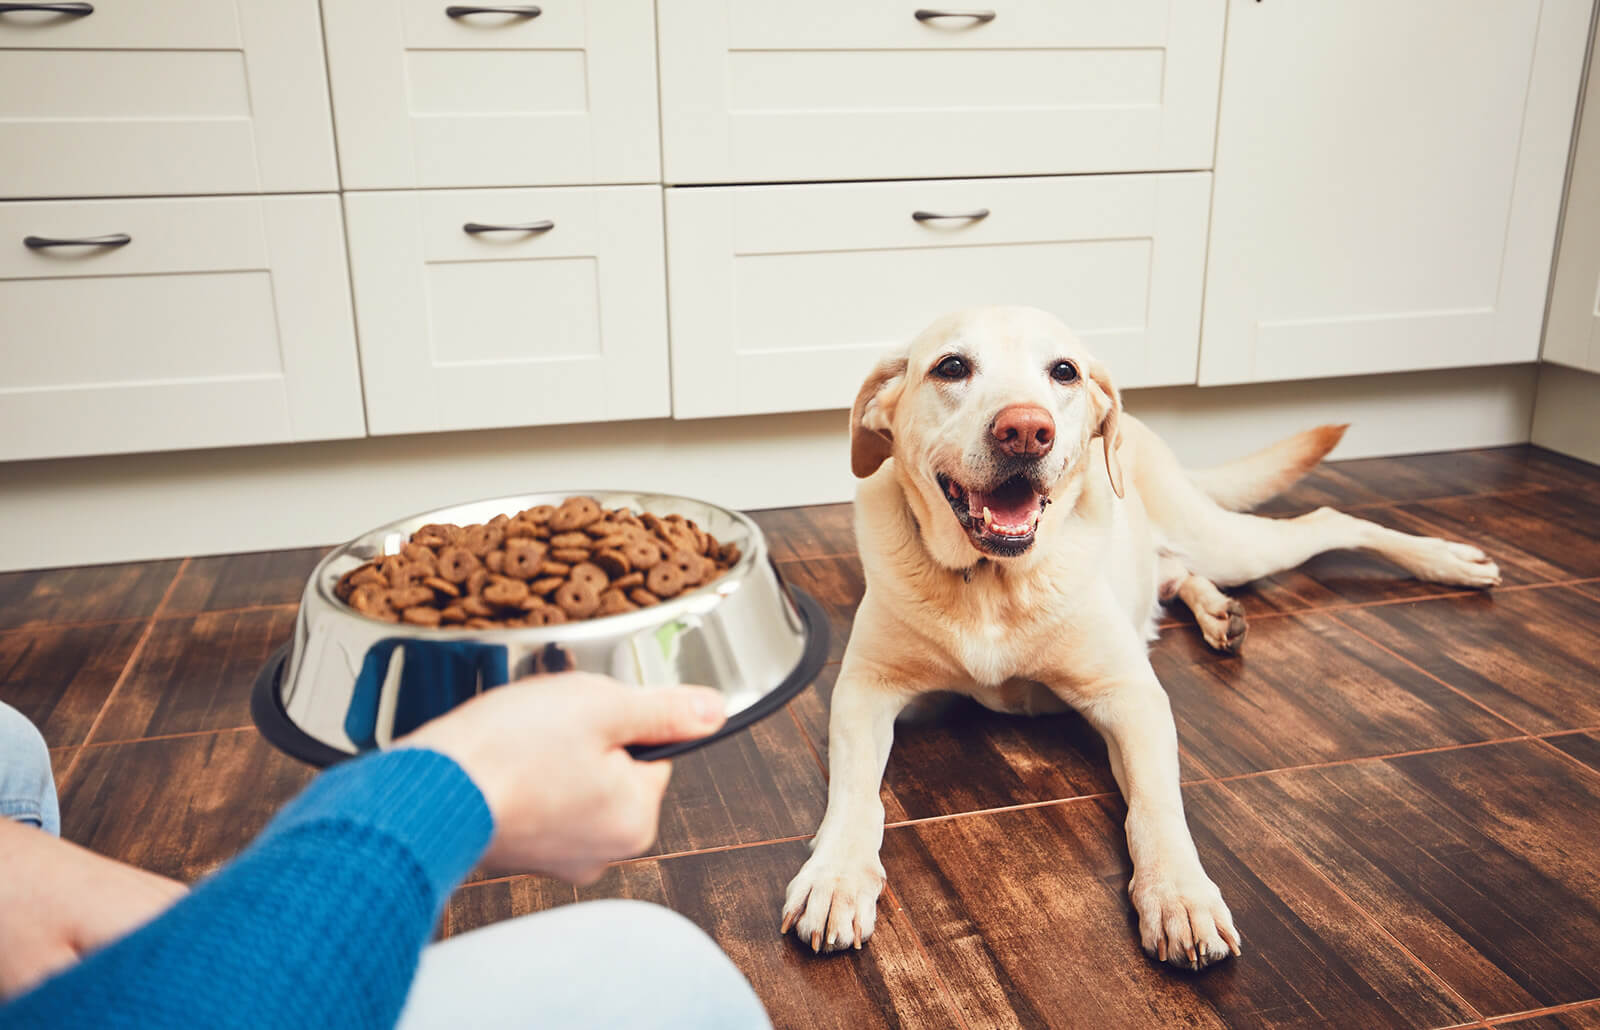 Grain-Free Dog Food: Beneficial or Dangerous?